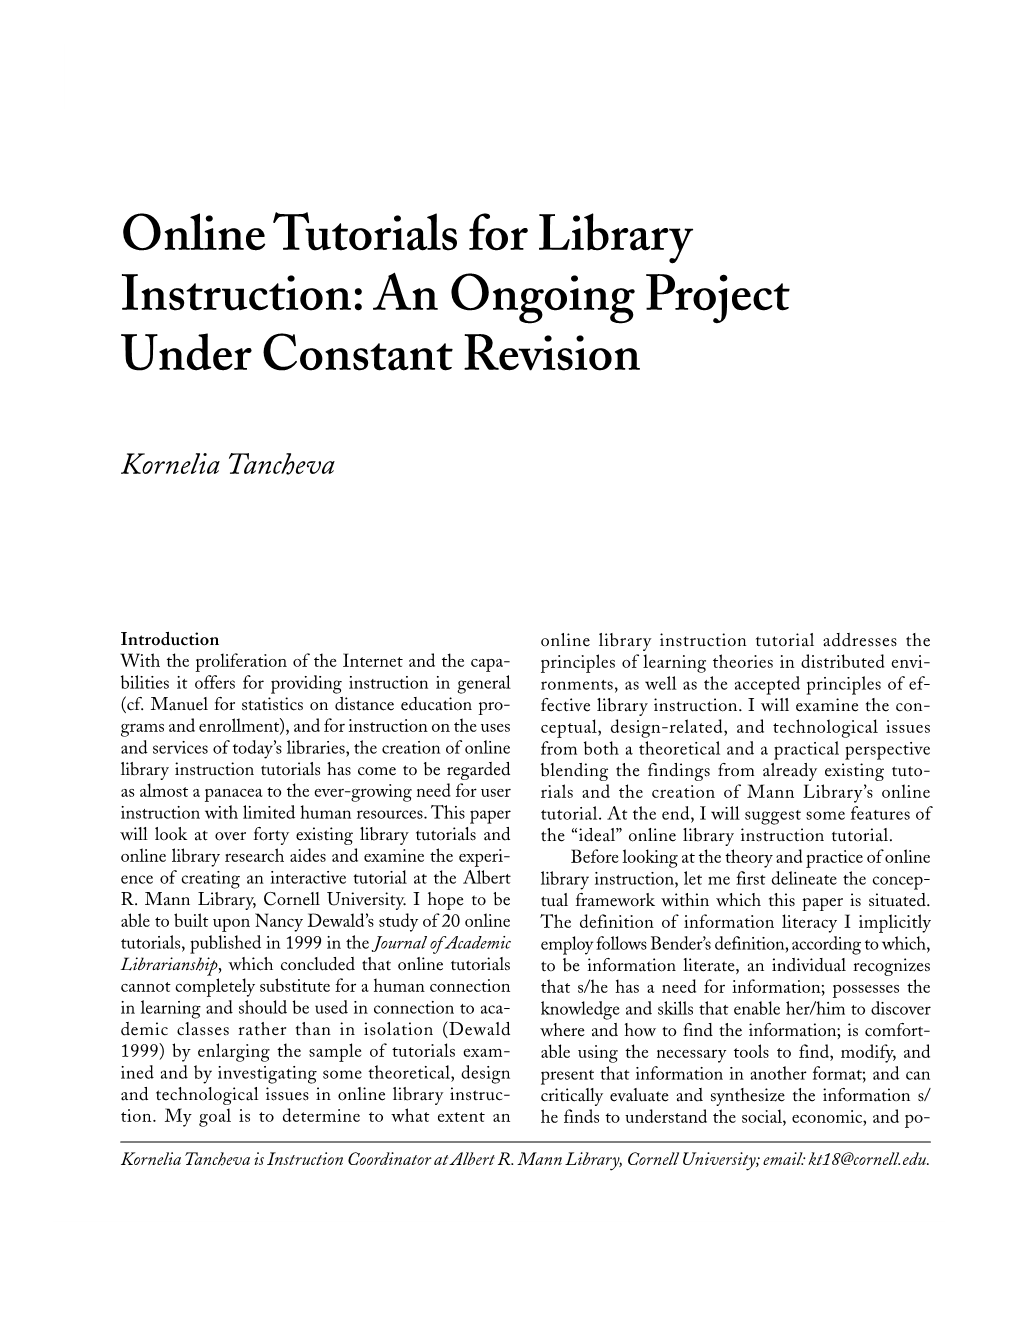 Online Tutorials for Library Instruction: an Ongoing Project Under Constant Revision